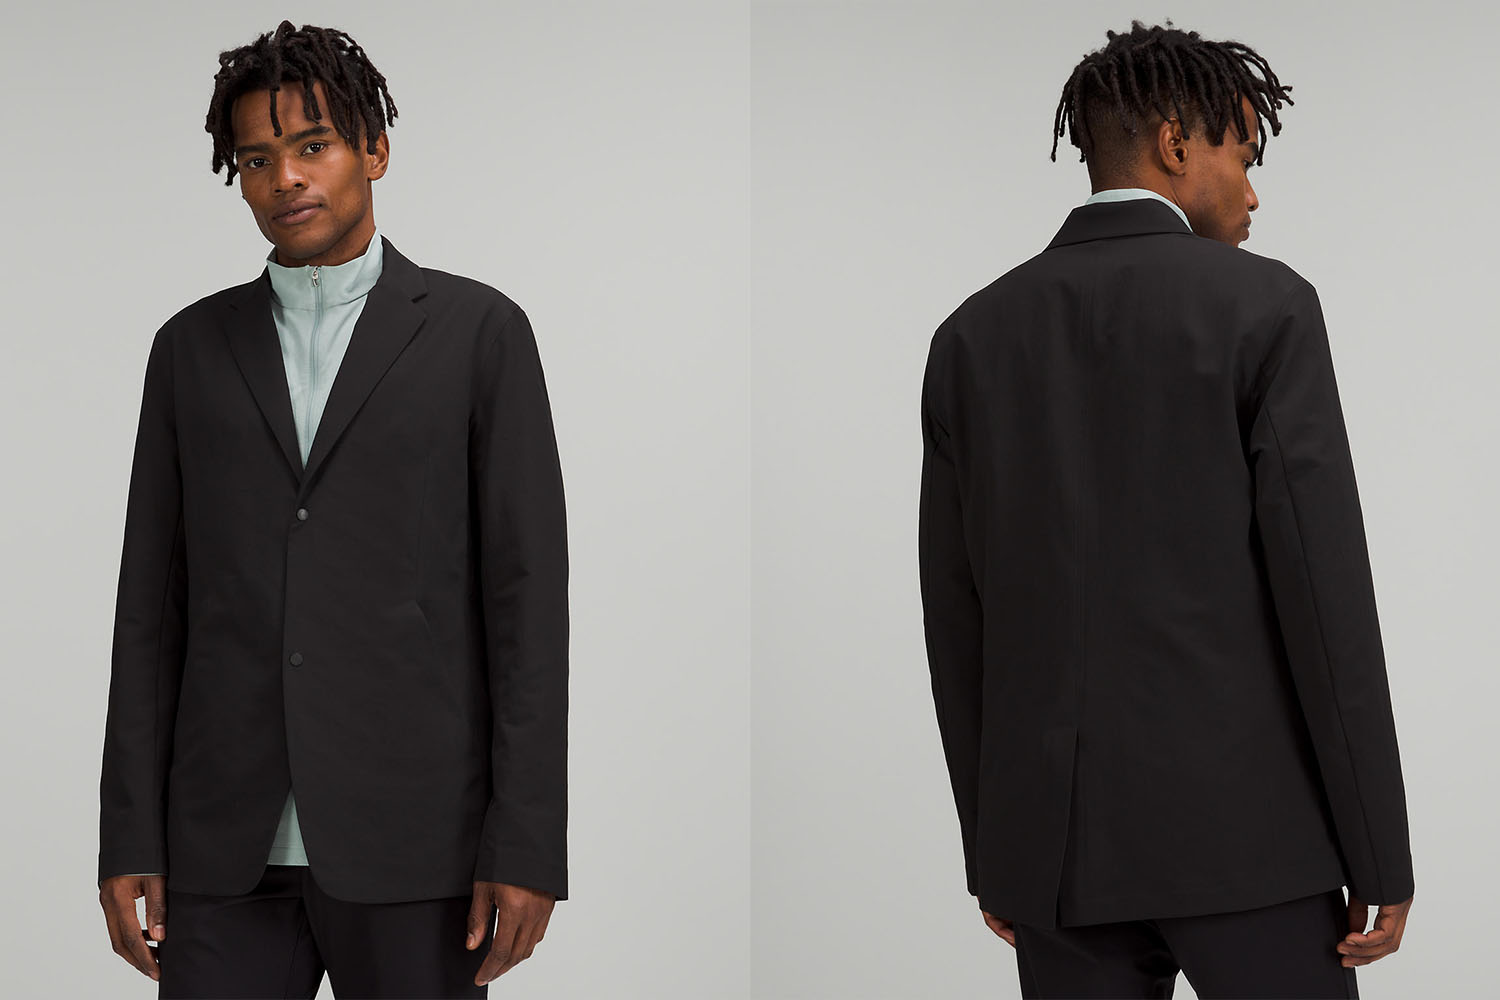 a double shot of the from and back of a model in a blue blazer